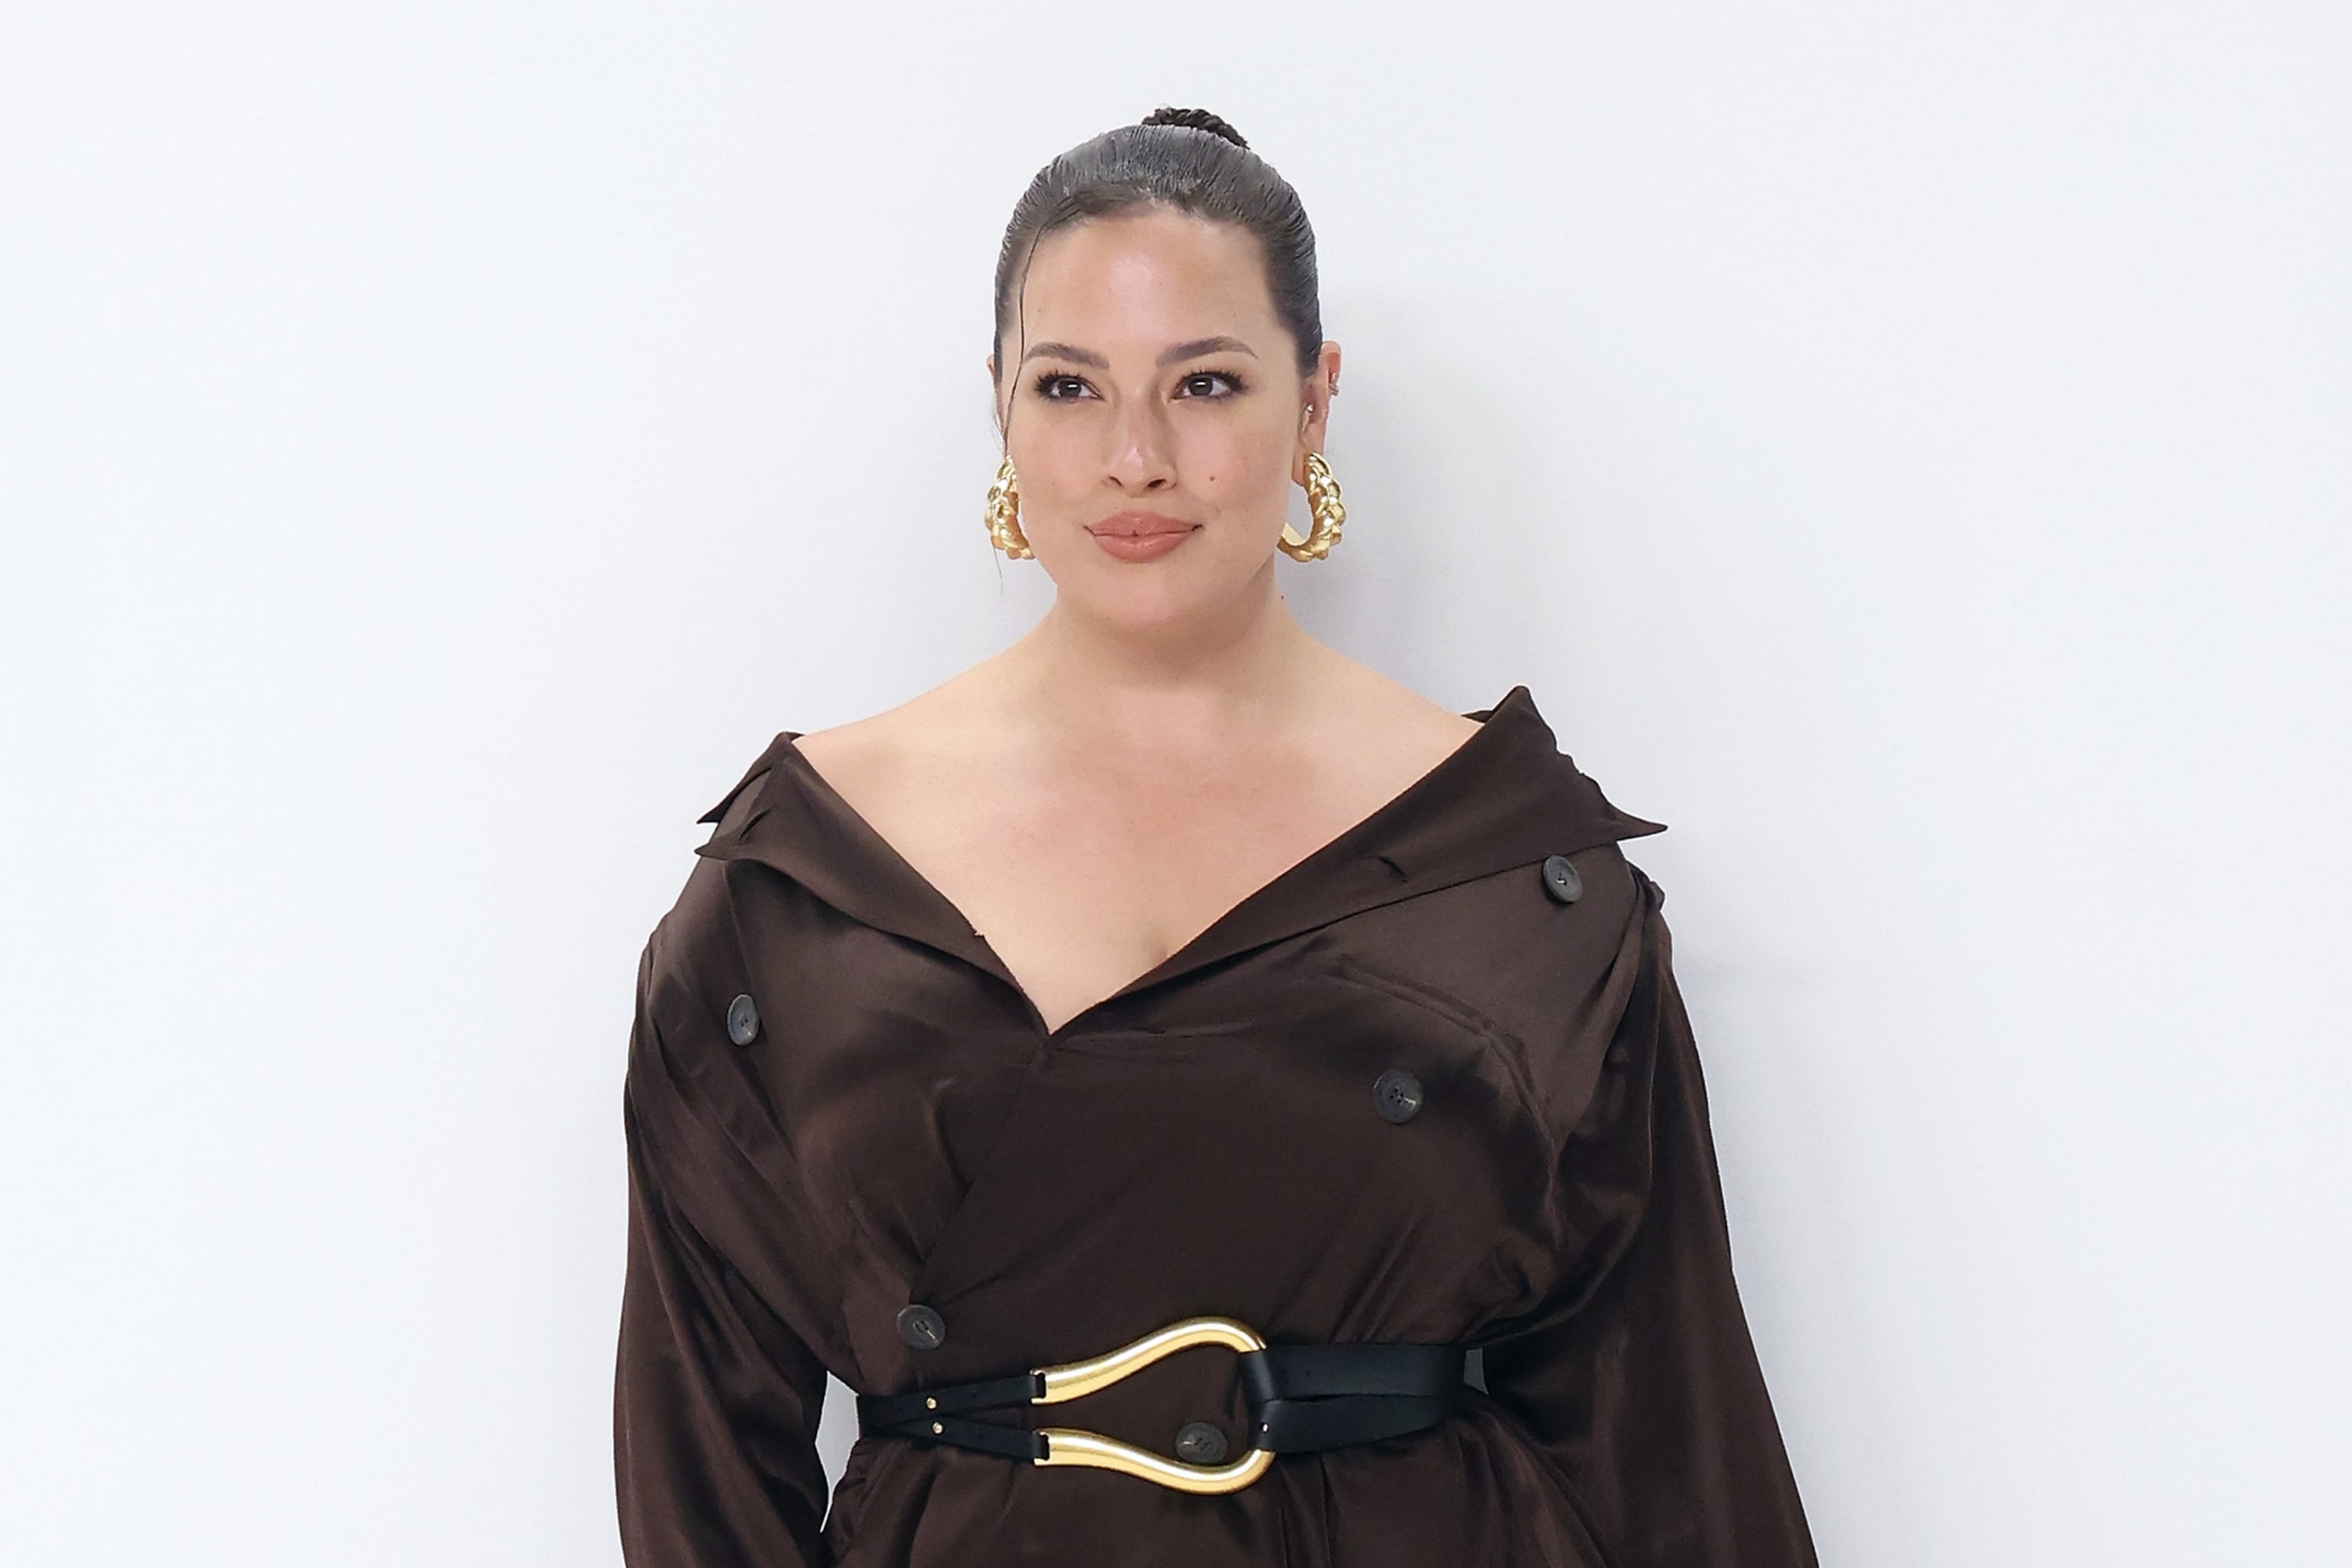 Get Ready! An Ashley Graham x KNIX Collection is Coming!